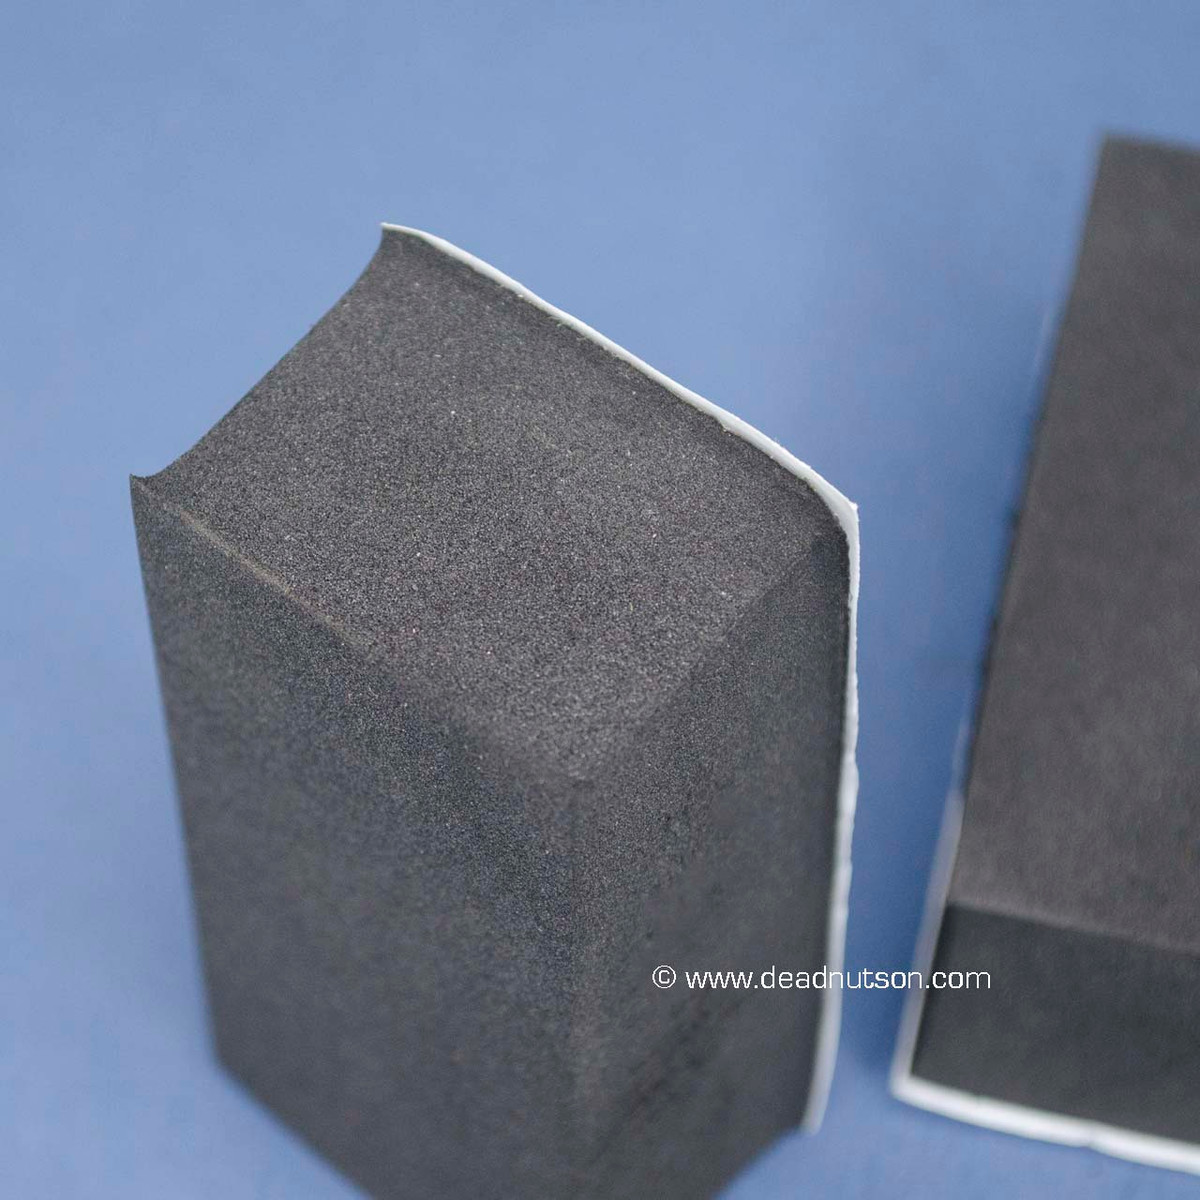 Cowl Panel Support Foam Pads - Dead Nuts On